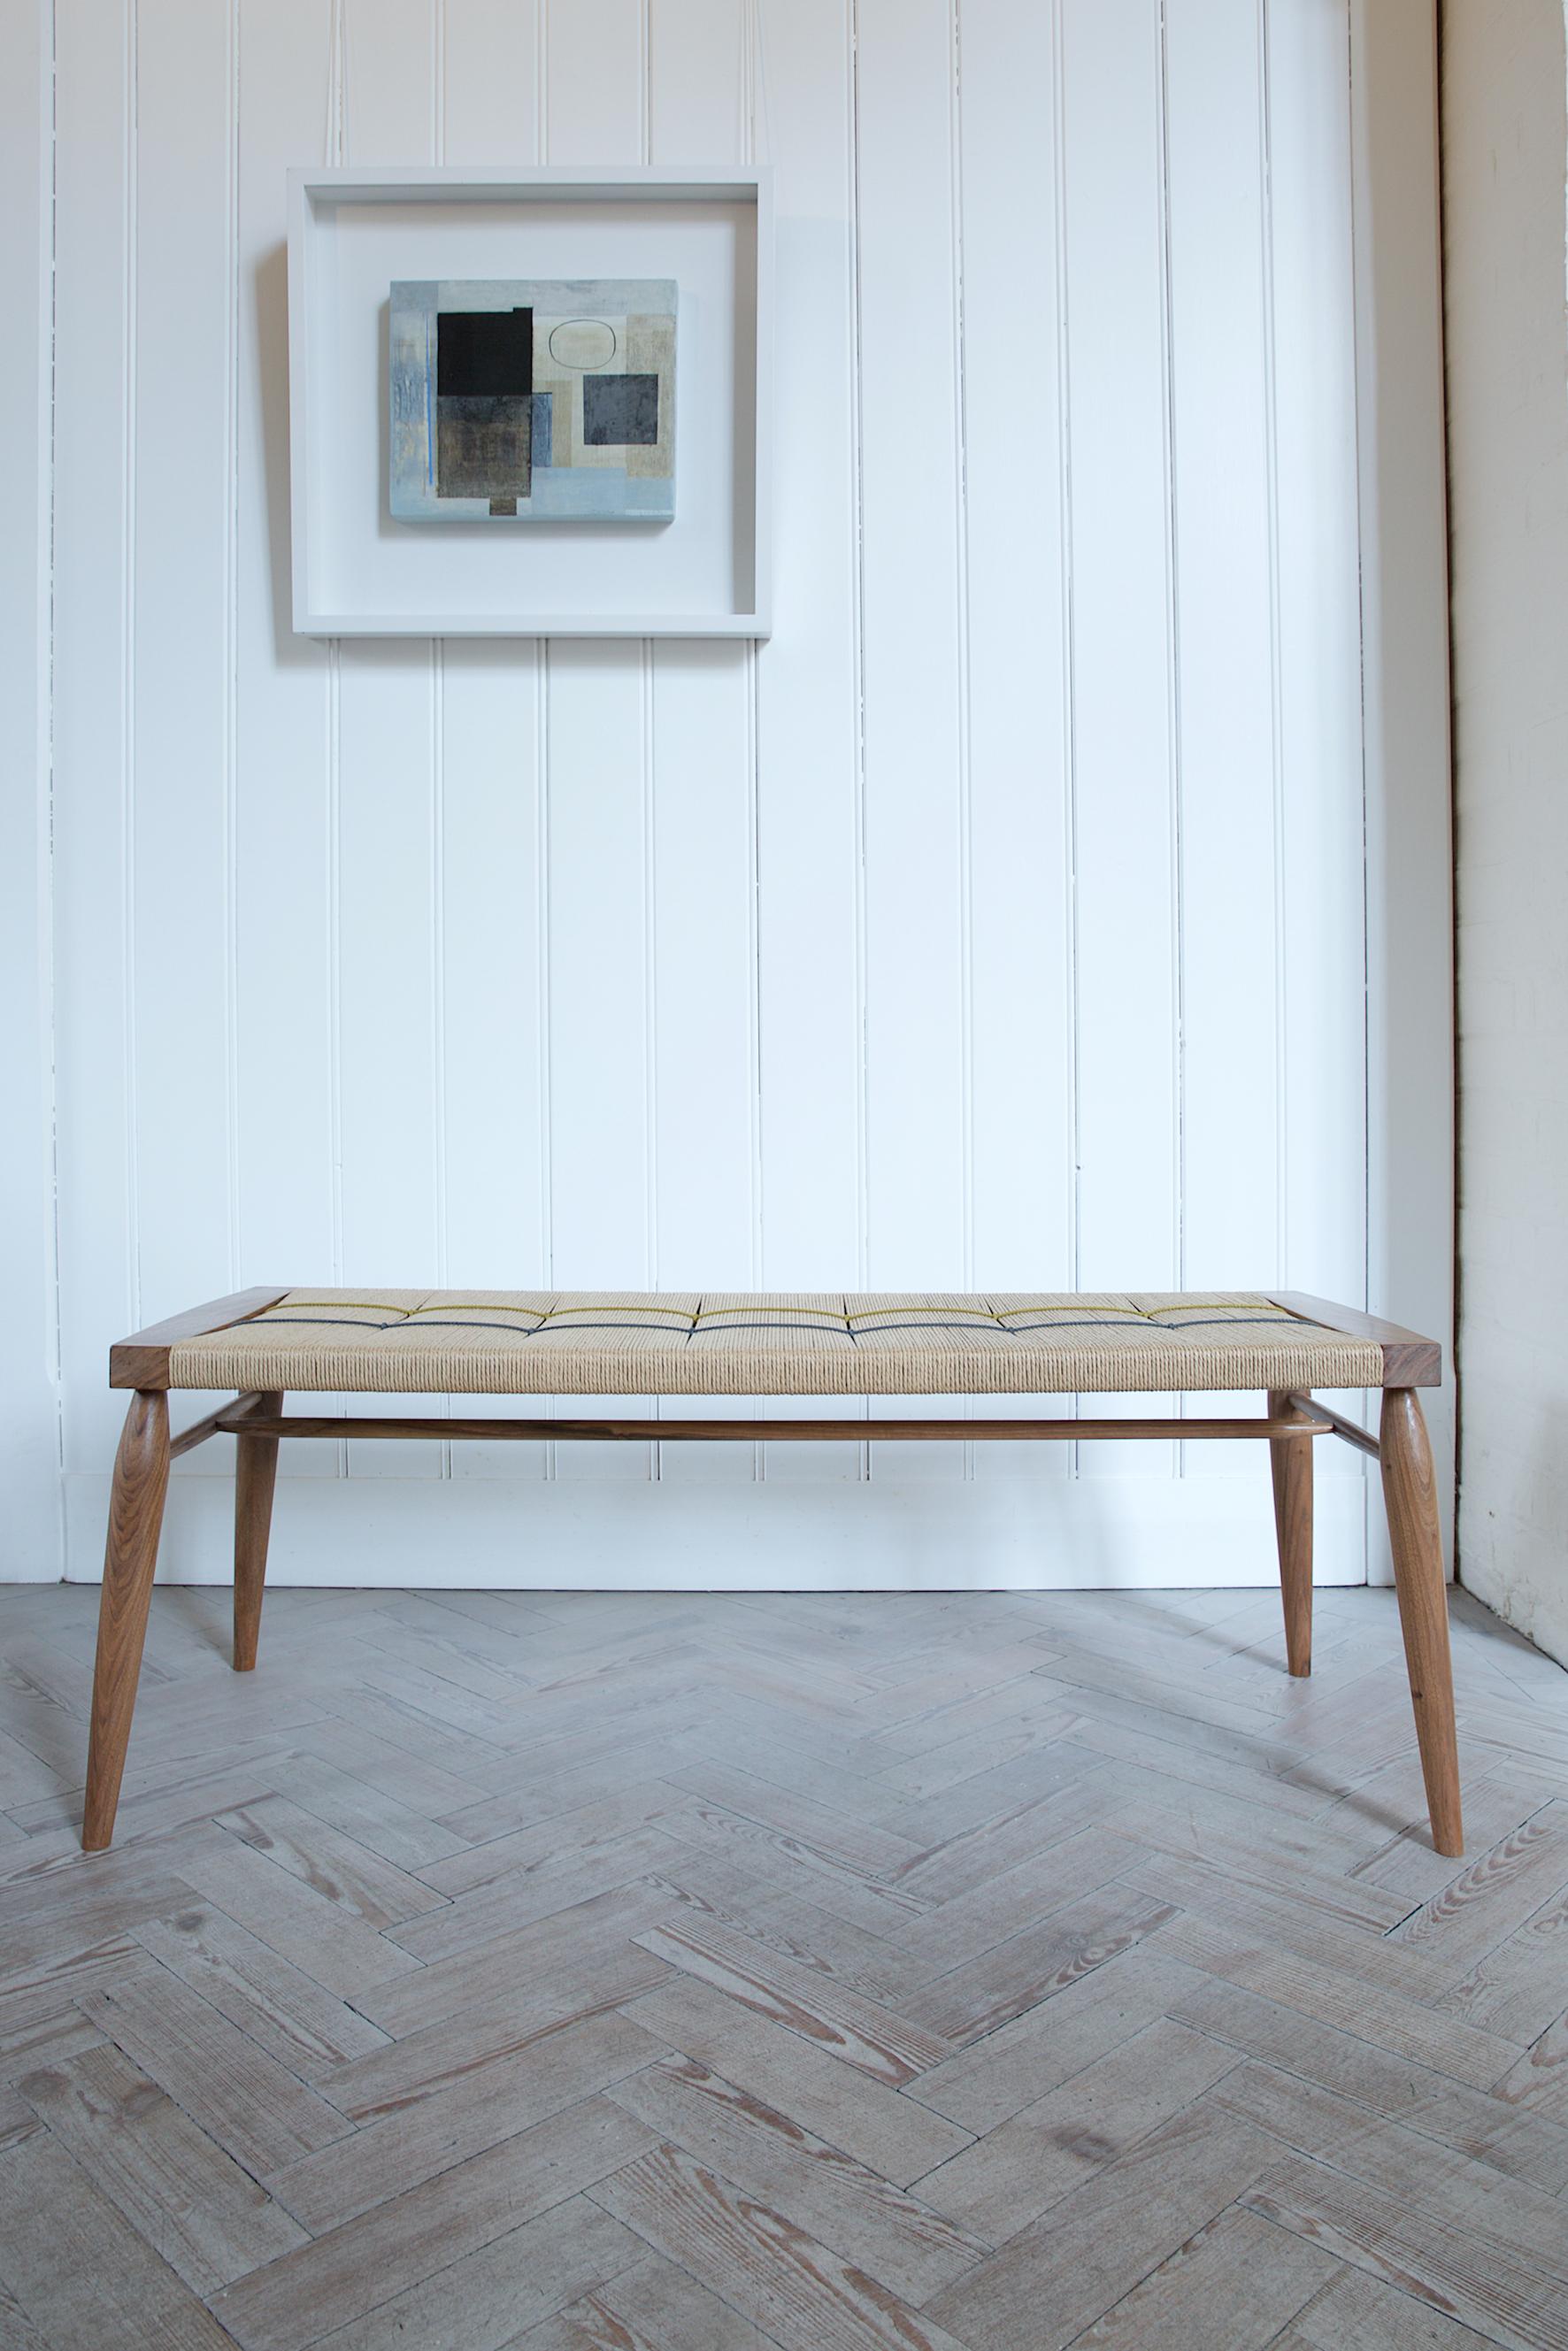 Traditionally made woven bench with a contemporary Danish cord and coloured waxed cord weave. 

Completely handmade to order, each bench is configured to size and material to suit the function and room setting. Using traditional cabinet making